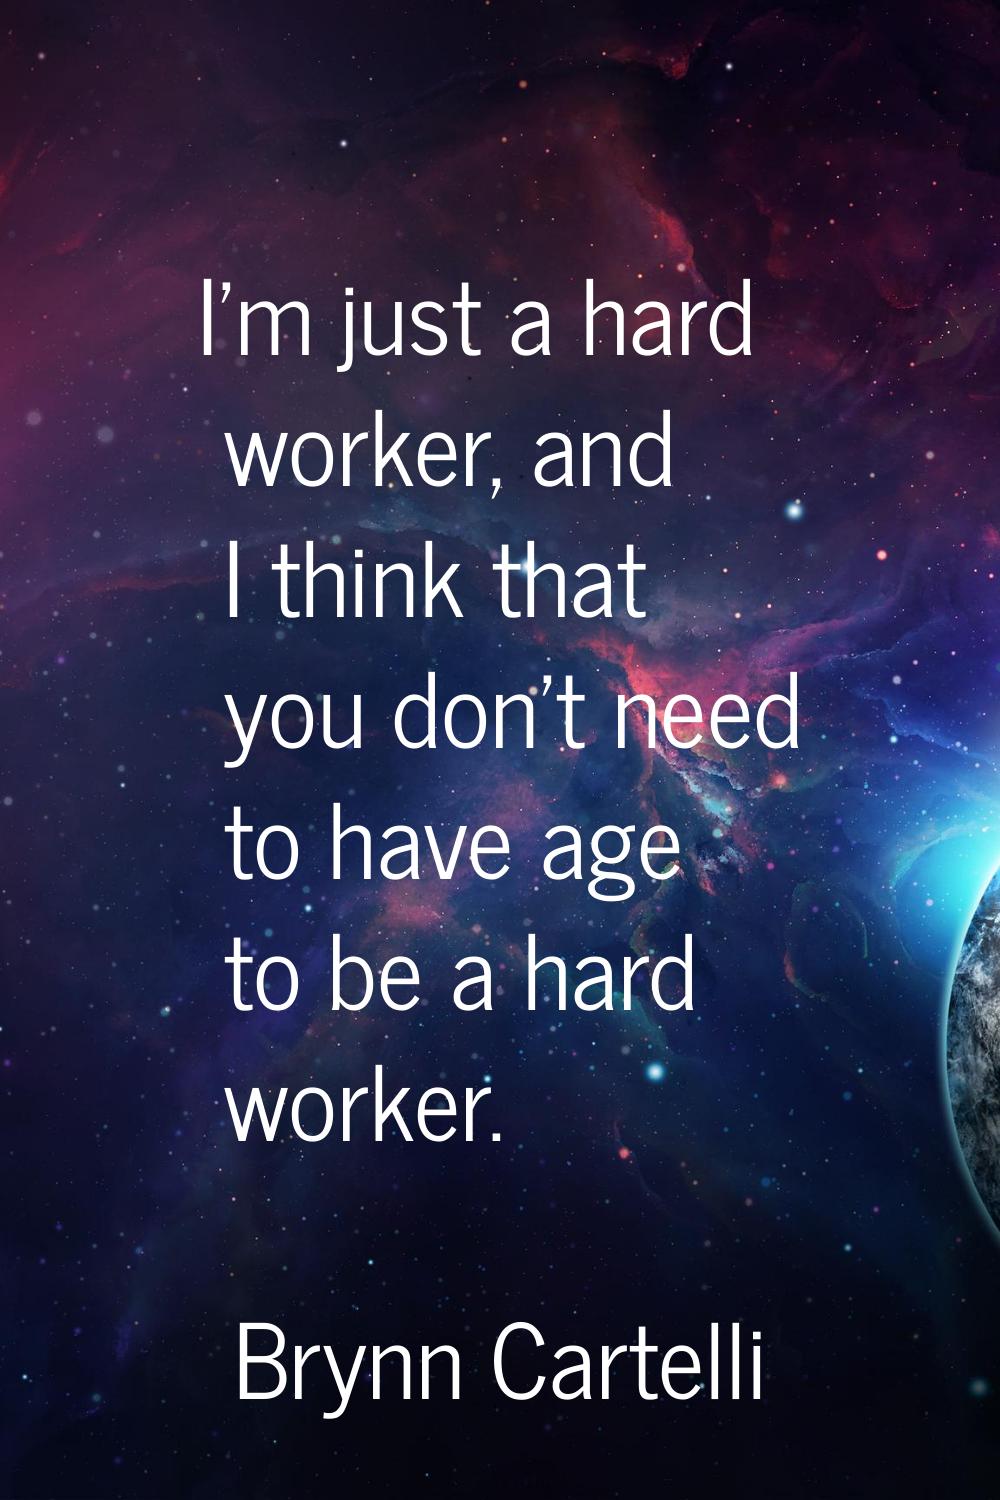 I'm just a hard worker, and I think that you don't need to have age to be a hard worker.